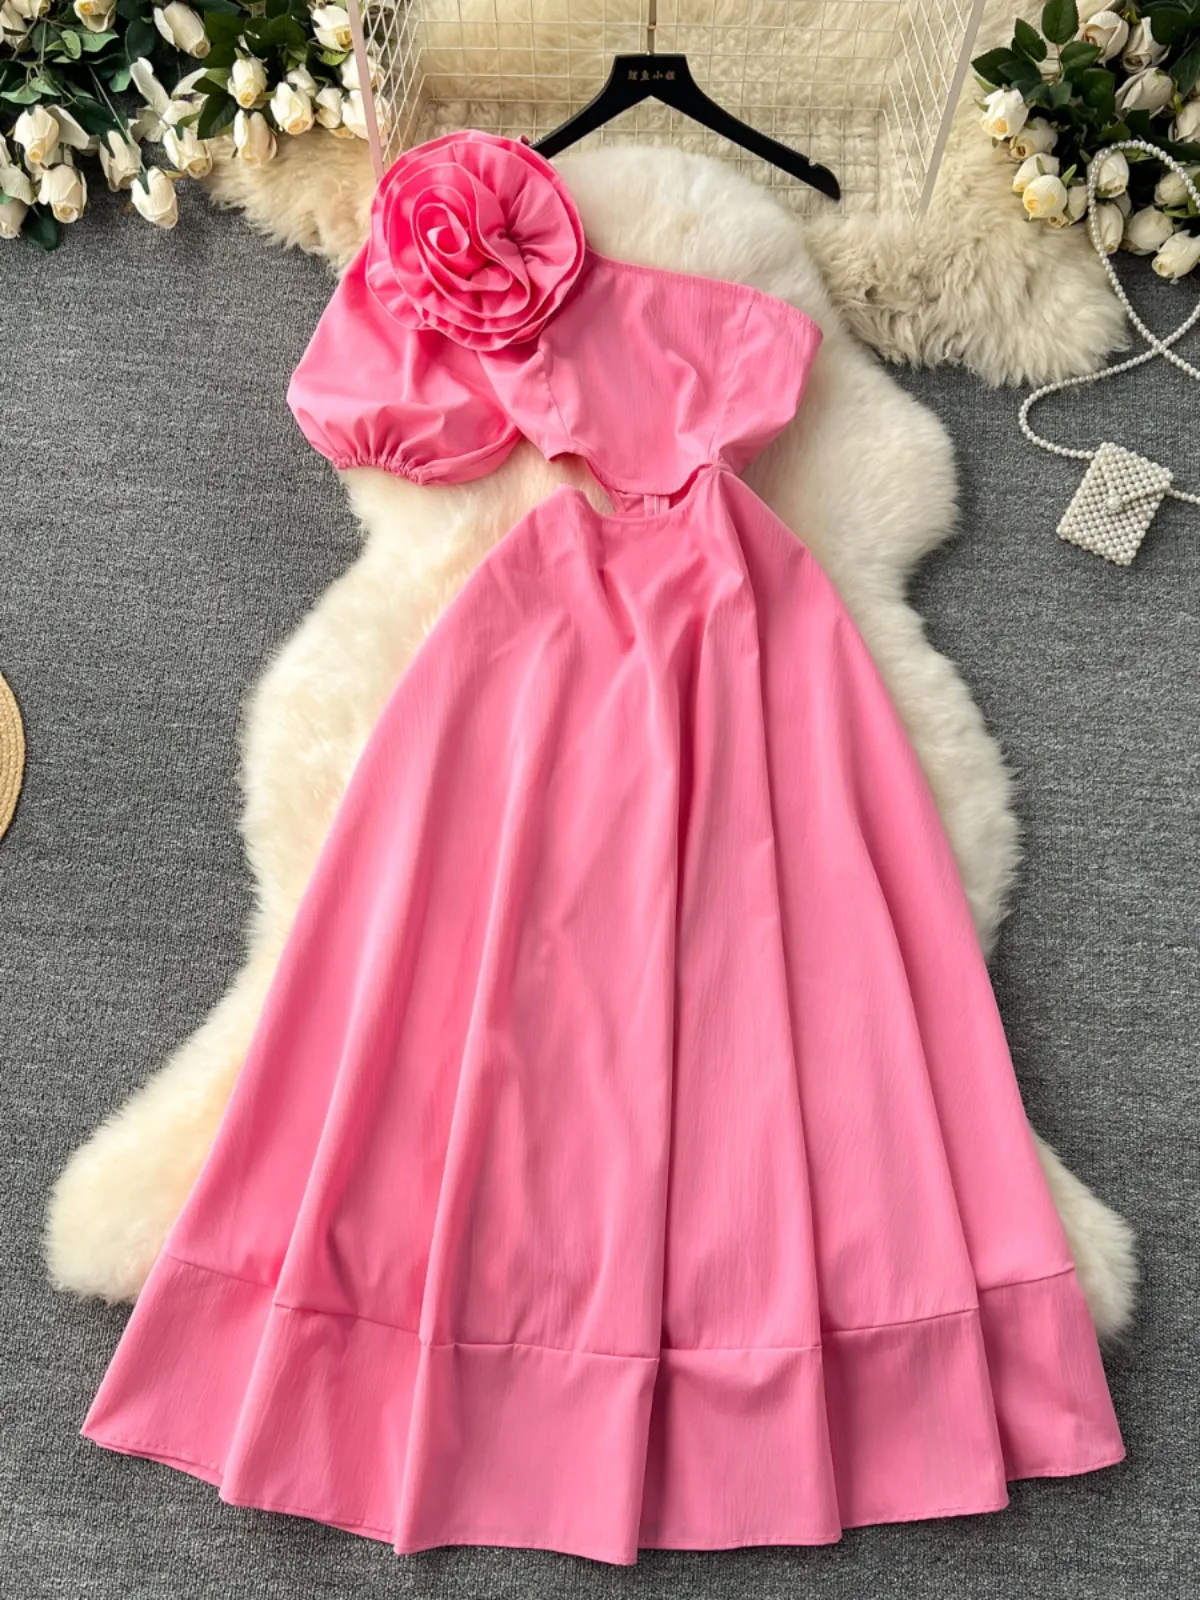 Celebrity temperament, birthday party, dinner party, small dress design, three-dimensional flower heart trick, hollowed out bubble sleeve dress